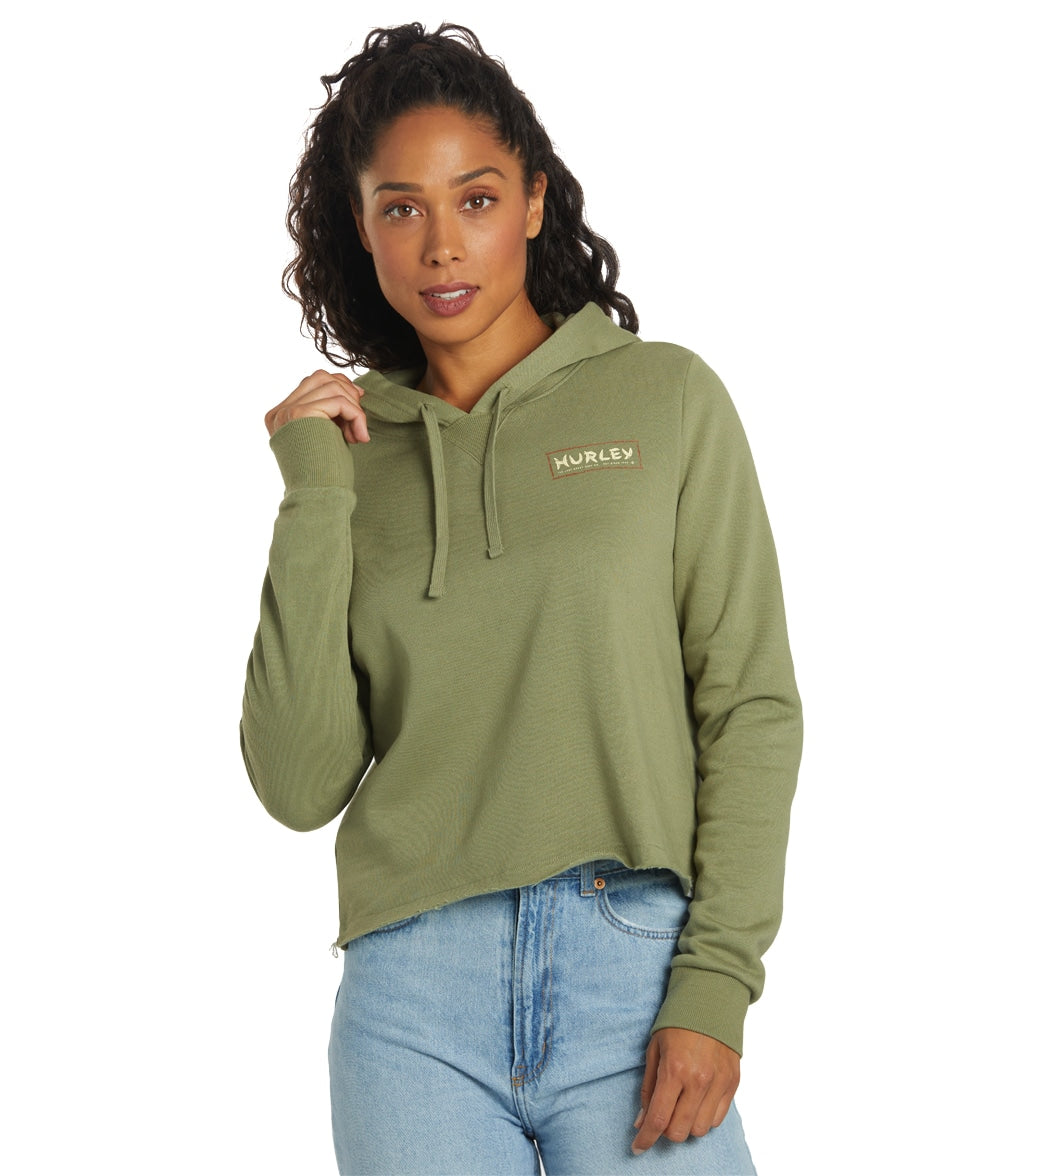 Colonial At håndtere pålidelighed Hurley Women's Death In Paradise Cut Off Pullover Hoodie at SwimOutlet.com